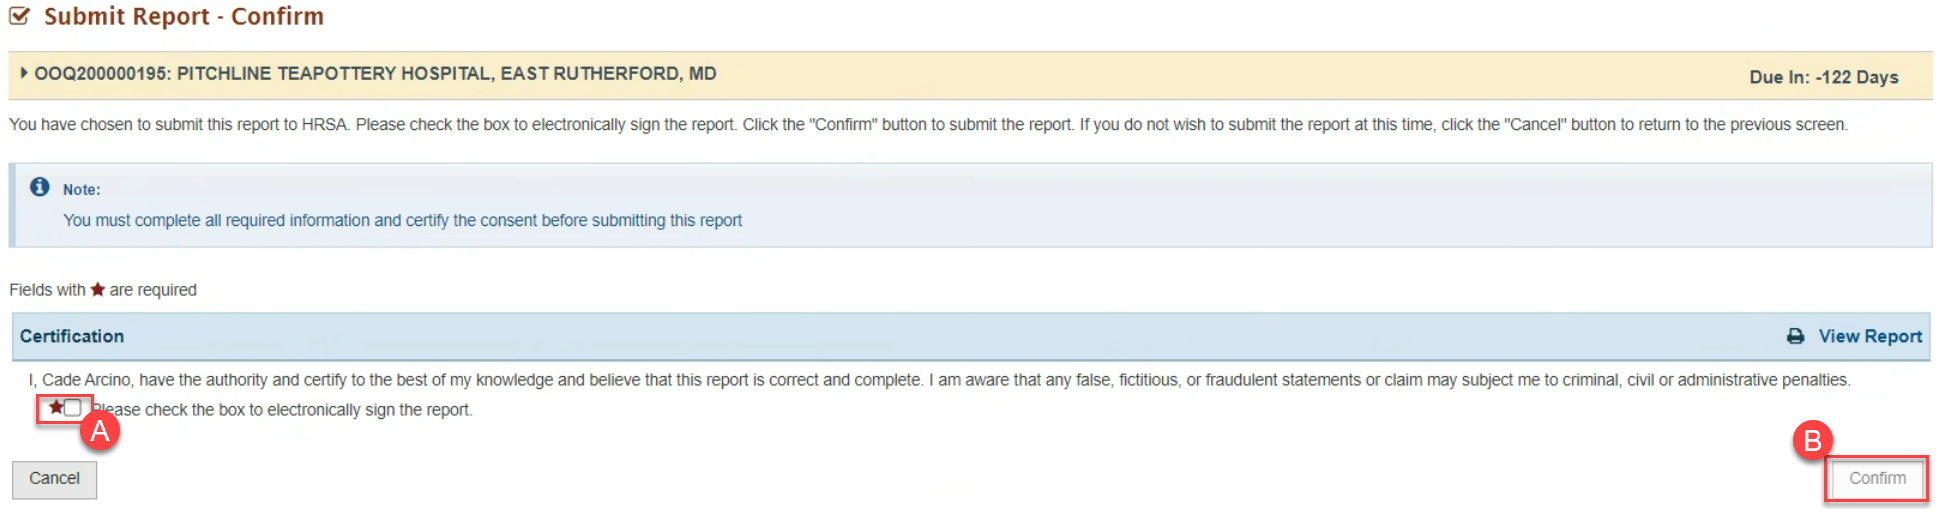 Screenshot of Submit Confirm page